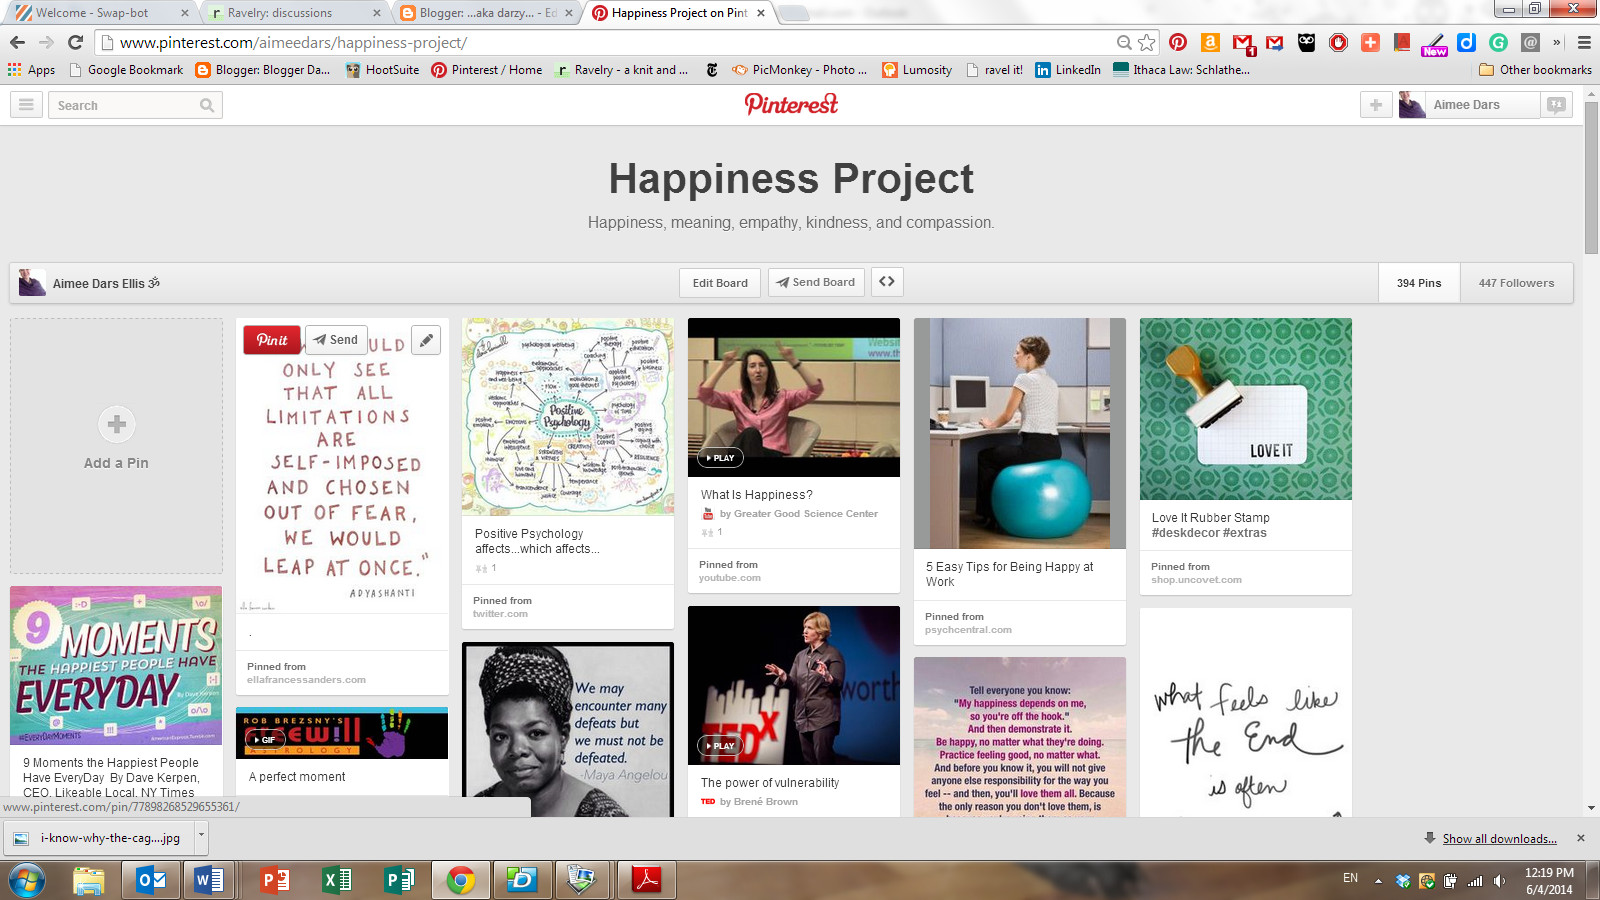 Screenshot of happiness project board on Pinterest.